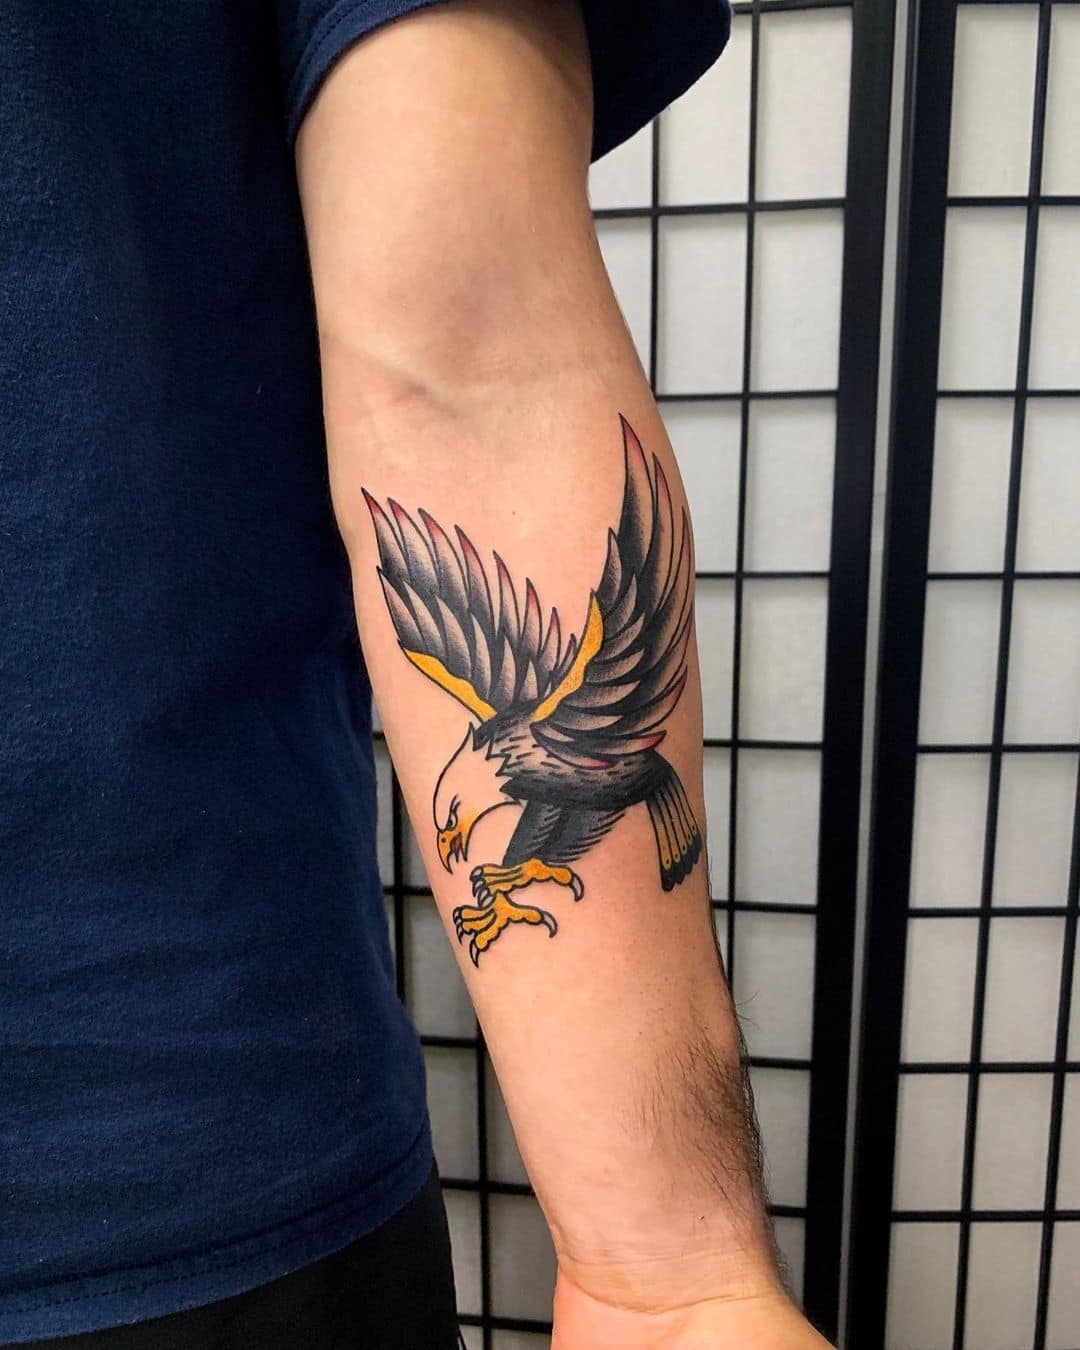 29 Forearm Tattoos for Men That Actually Look Good - Mom's Got the Stuff